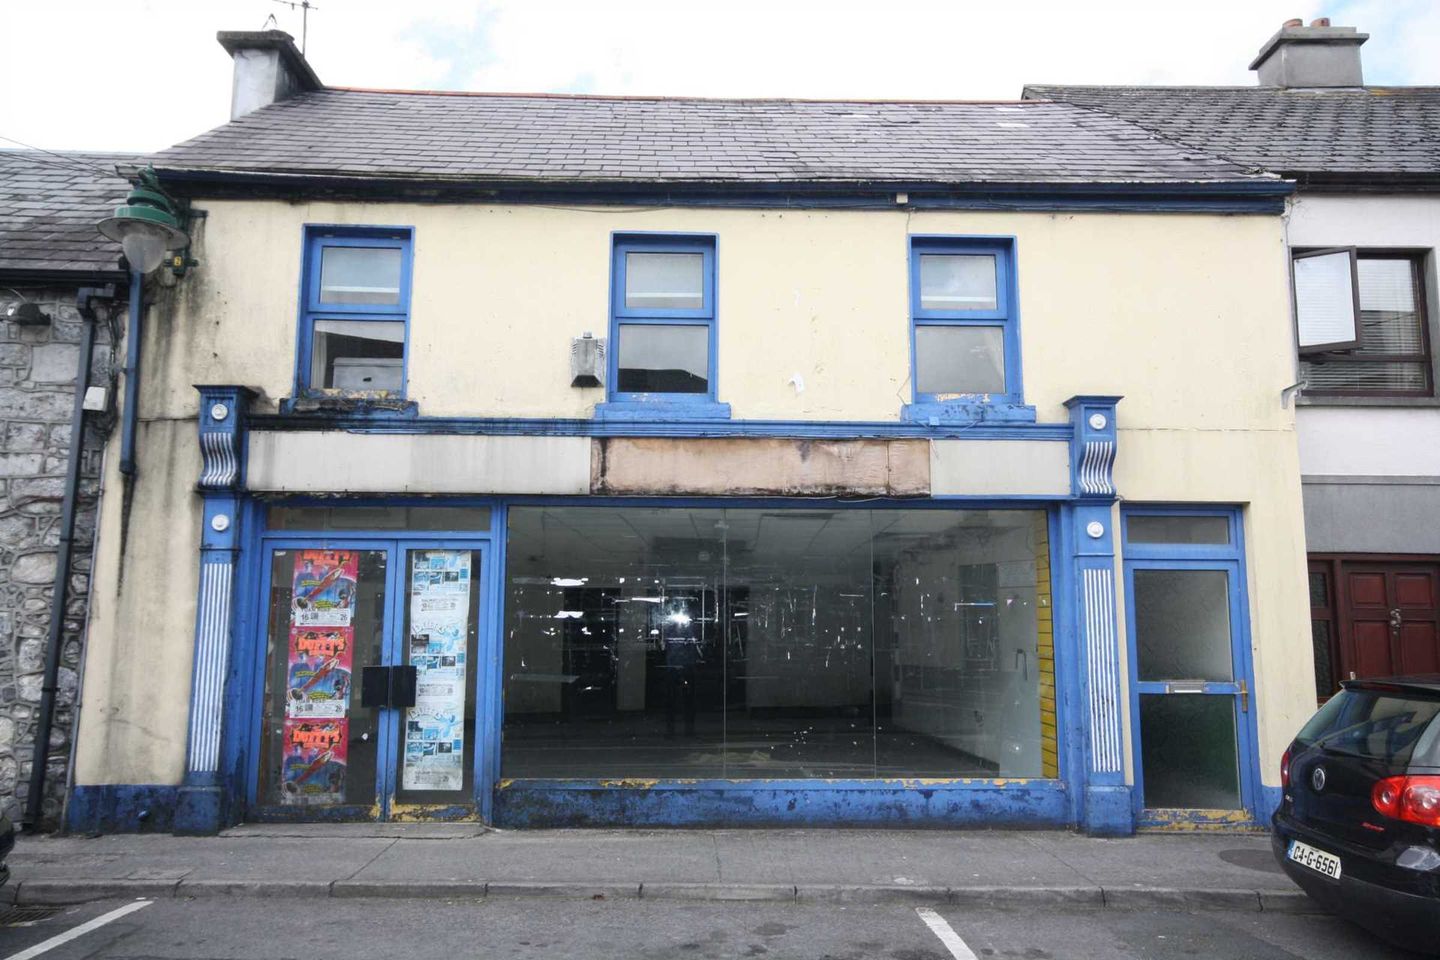 North Gate Street, Athenry, Co. Galway, H65D568